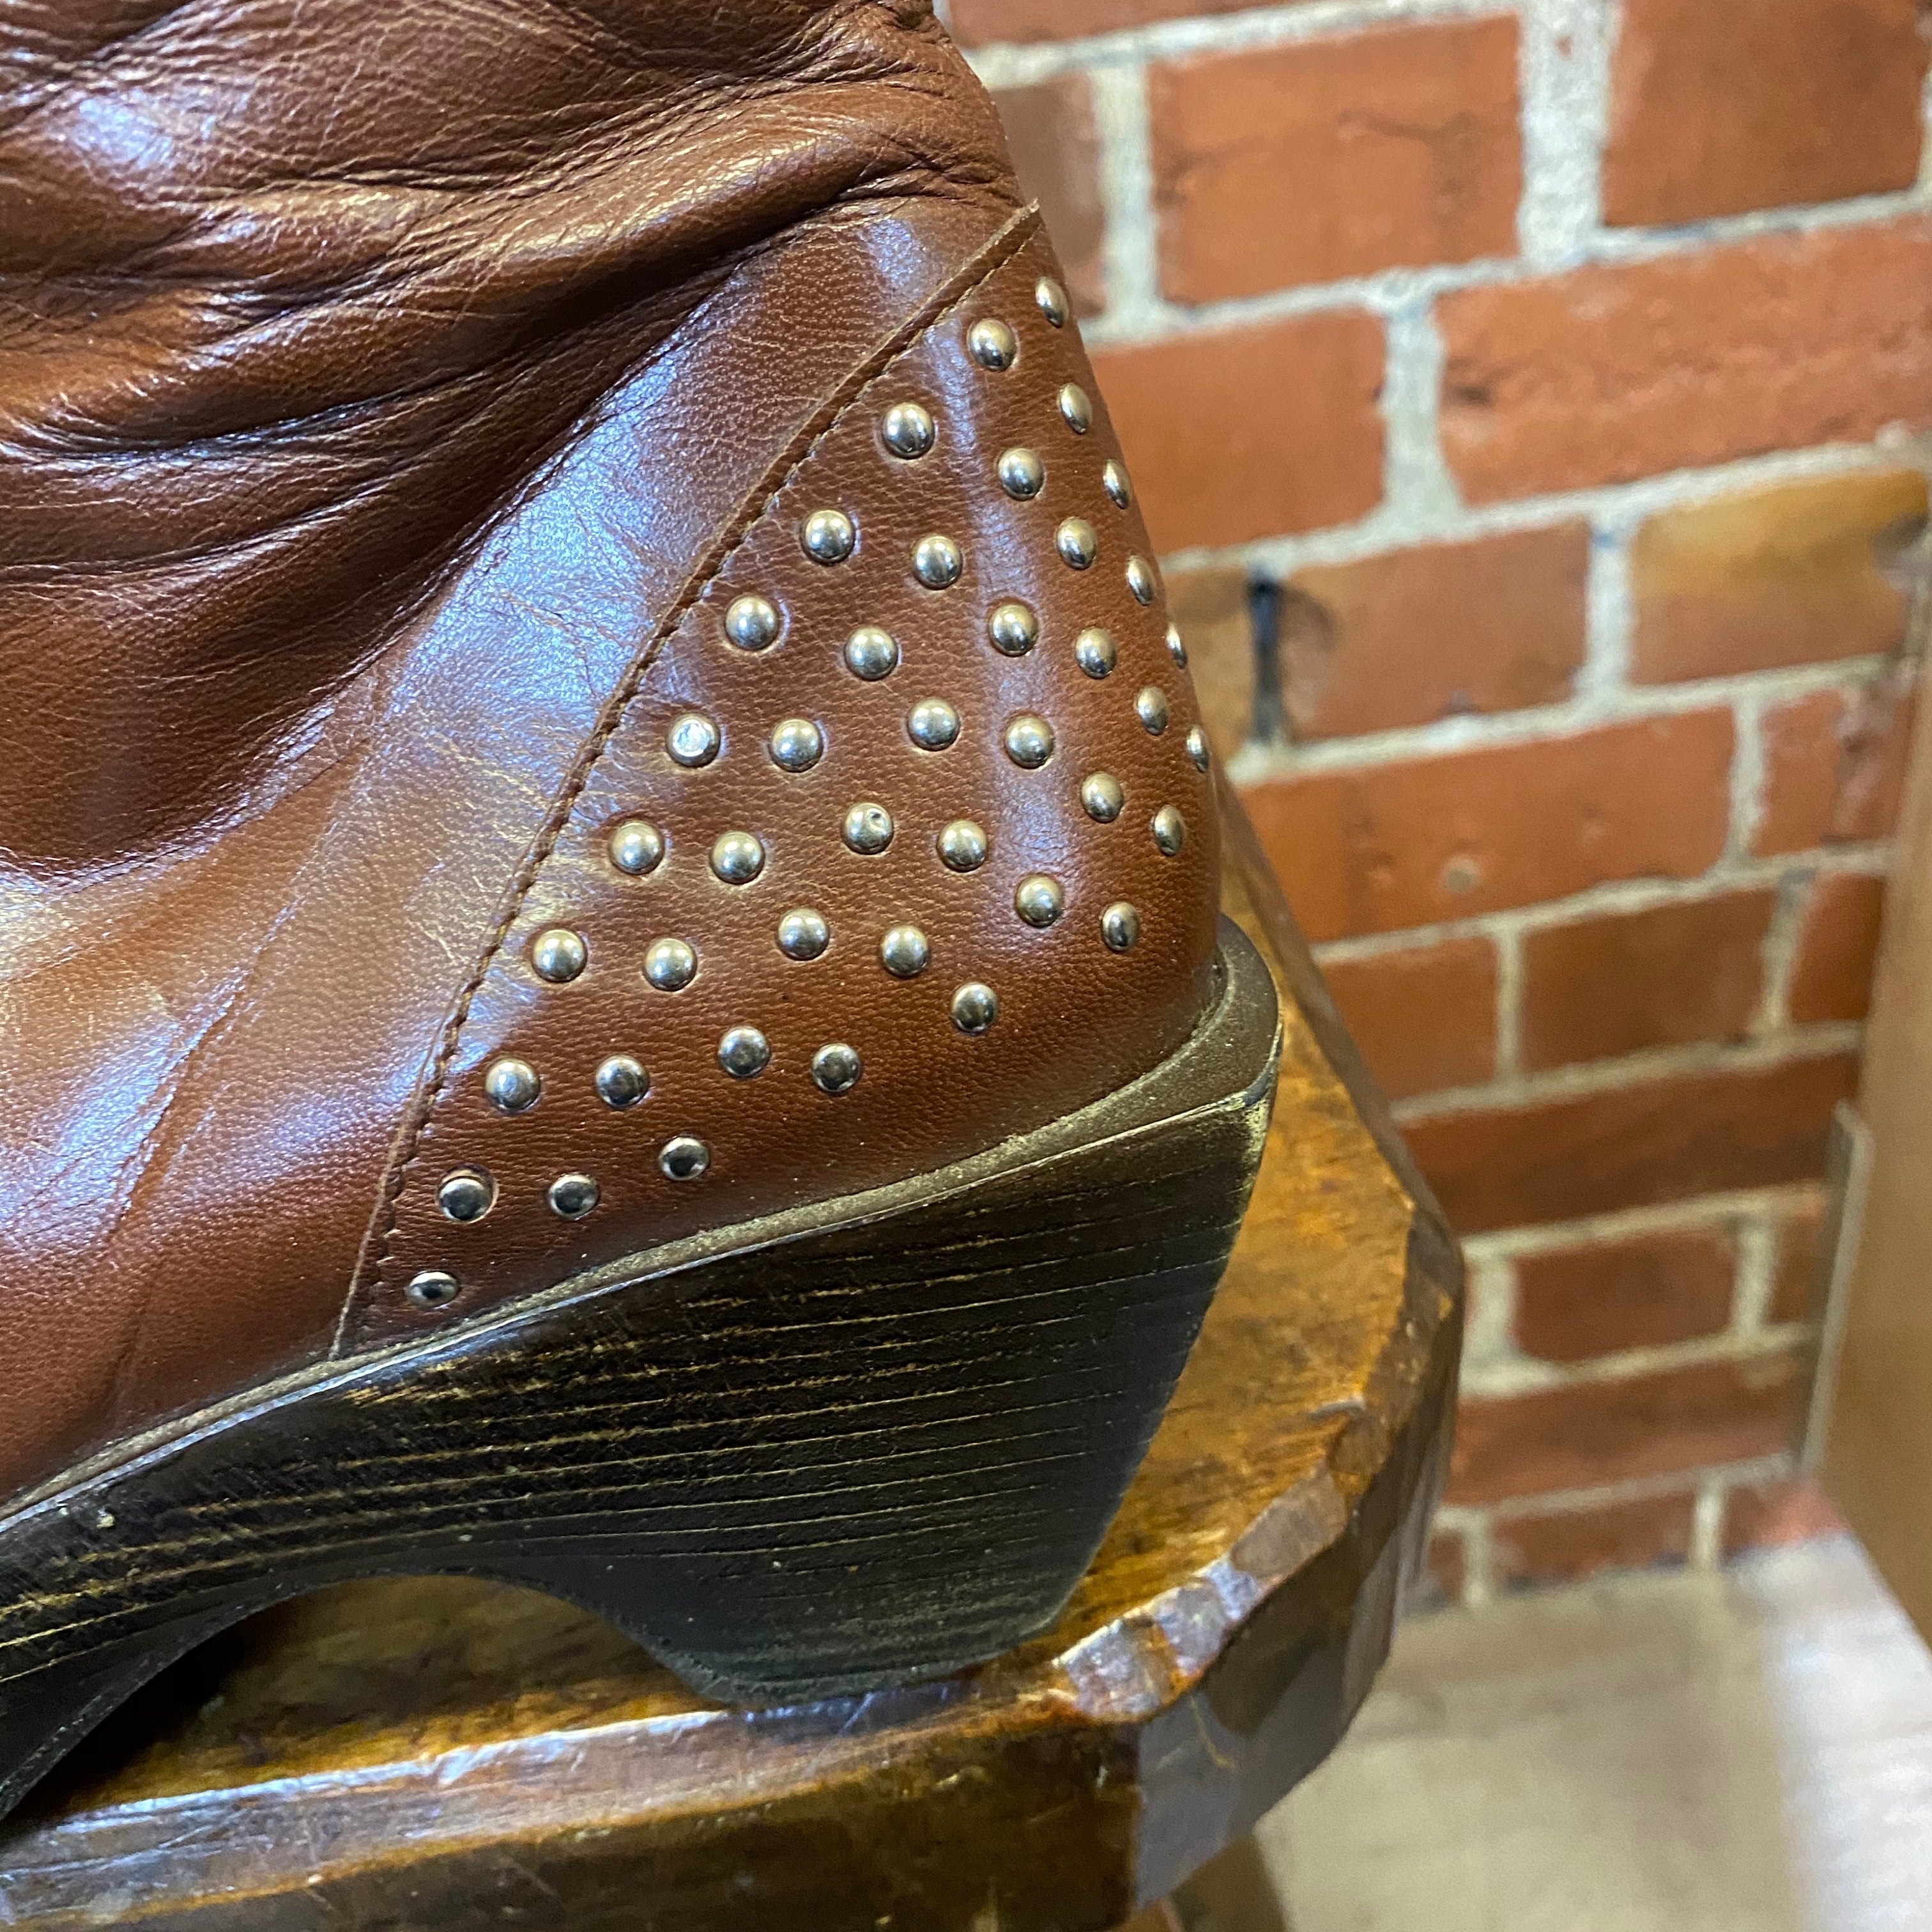 Western studded leather boots 37